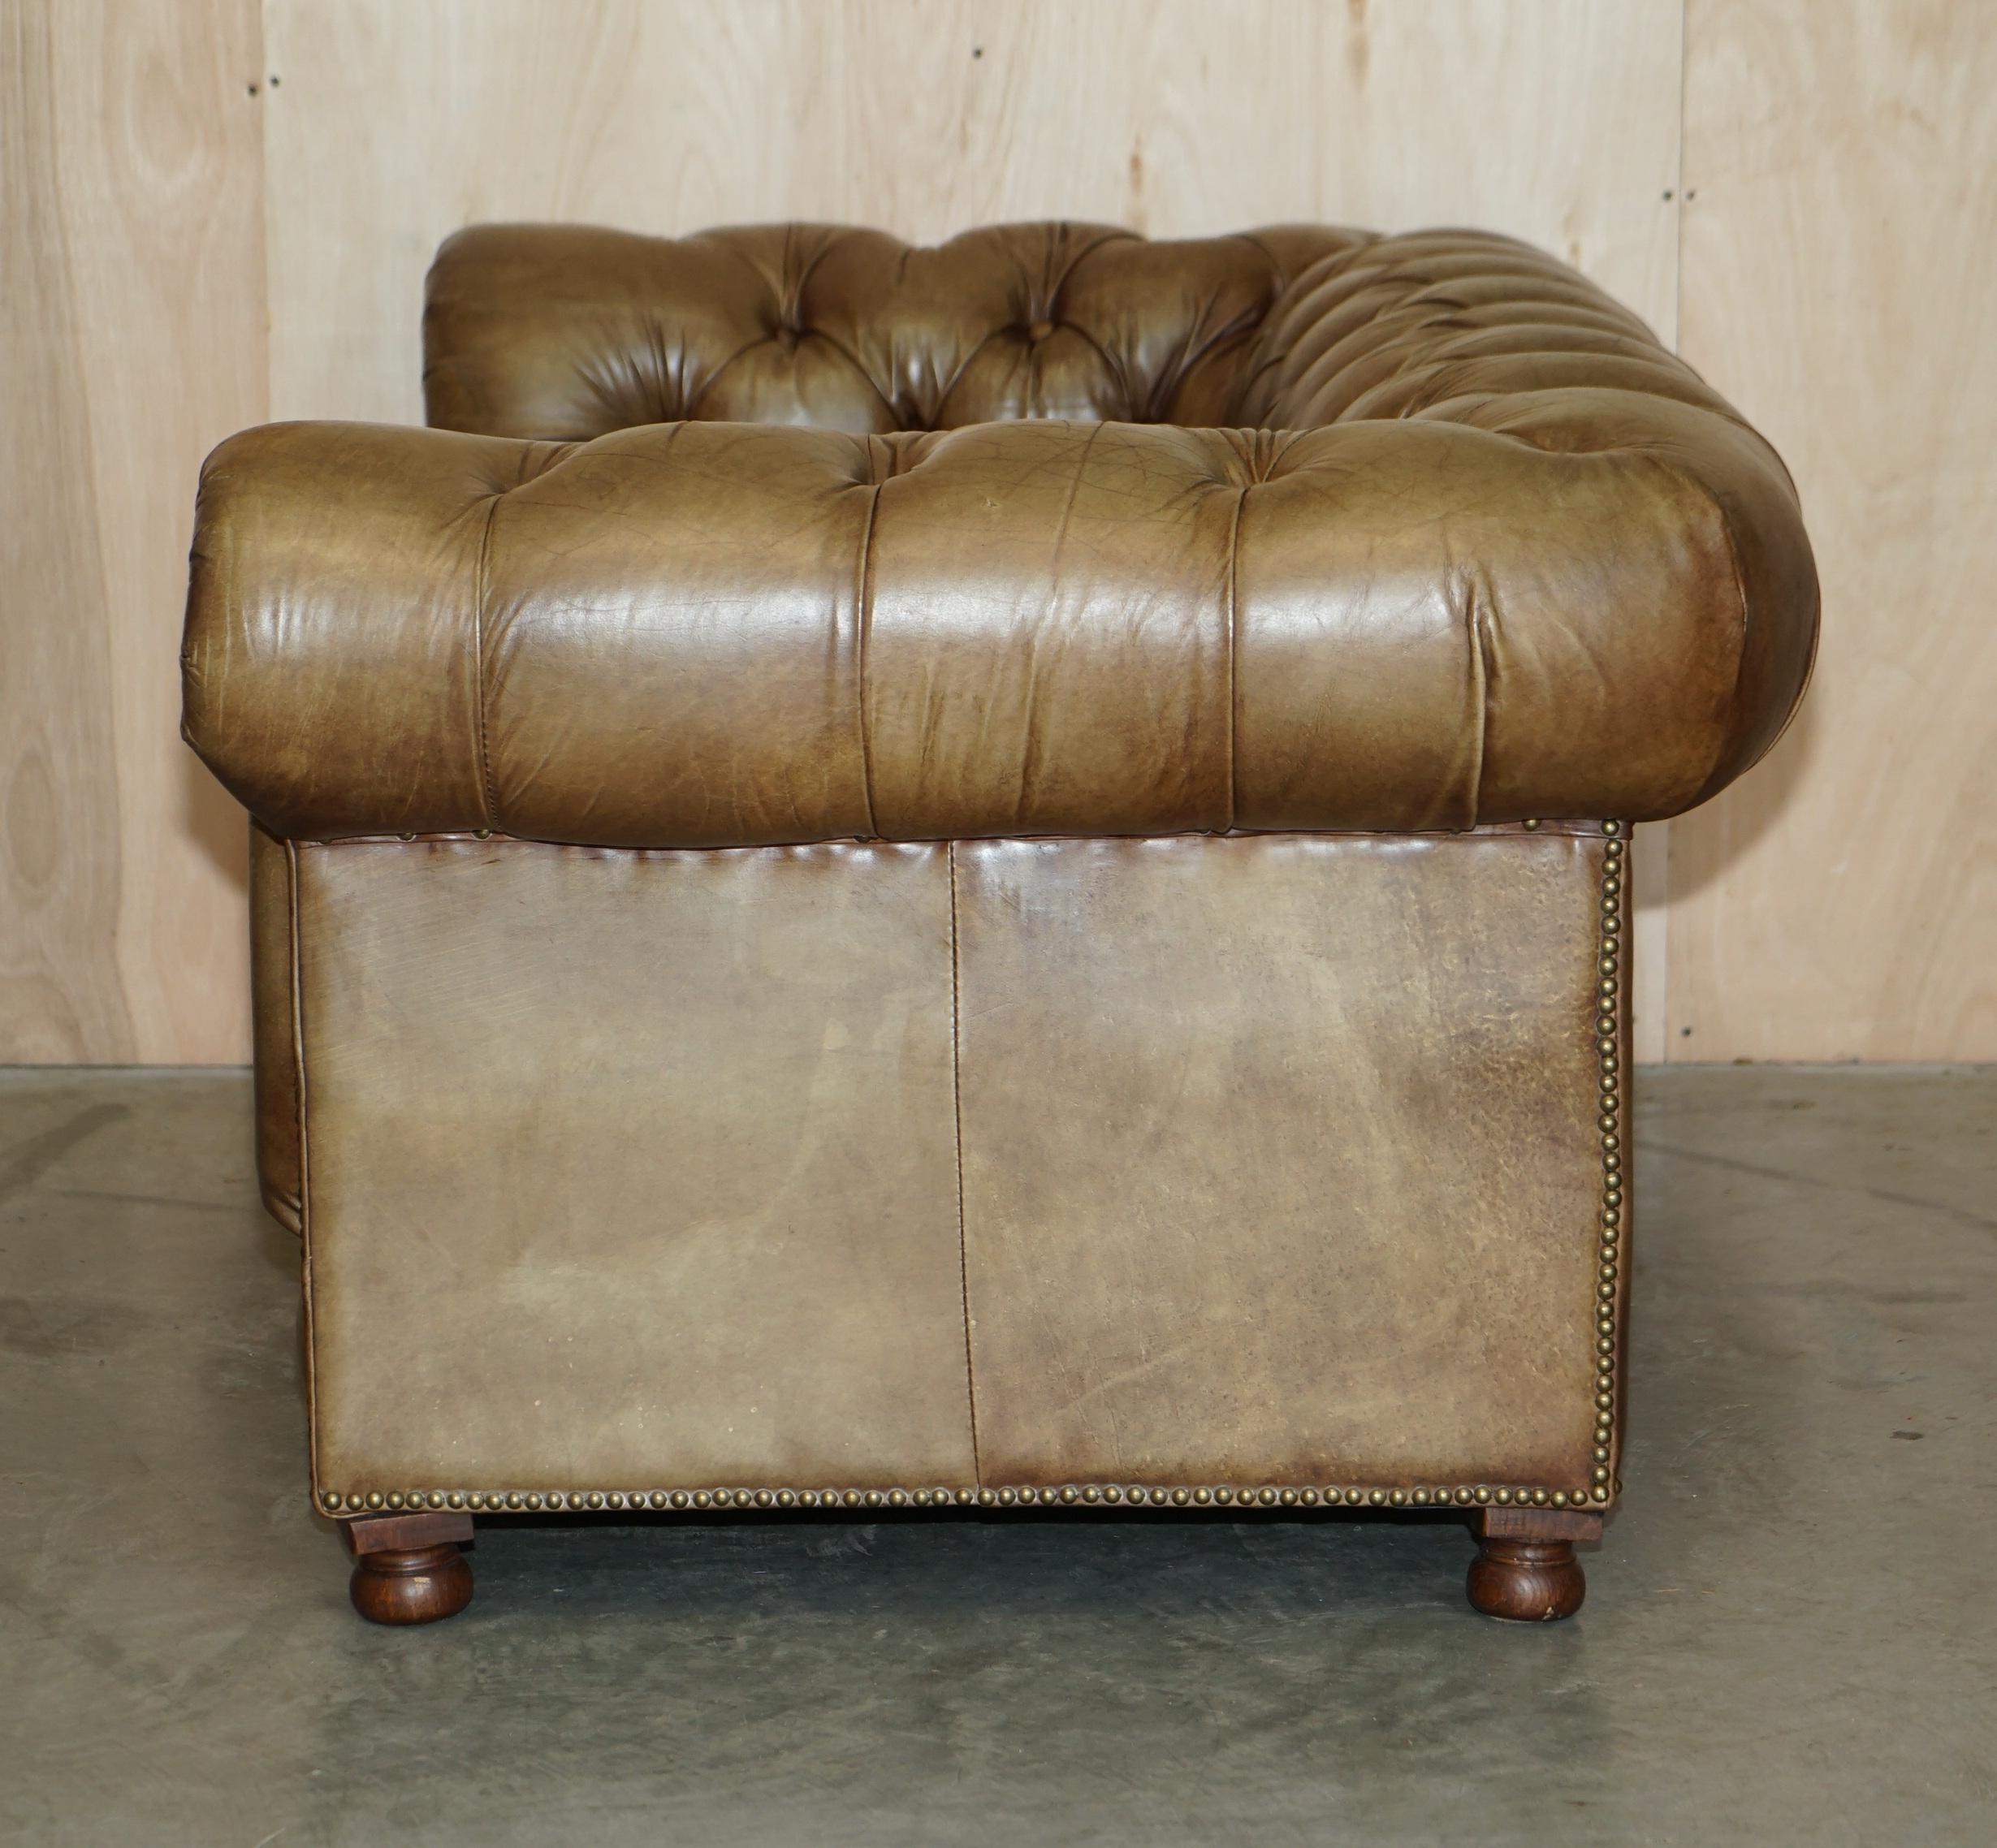 STUNNING TIMOTHY OULTON HALO WESTMiNSTER BROWN LEATHER CHESTERFIELD TUFTED SOFA 2